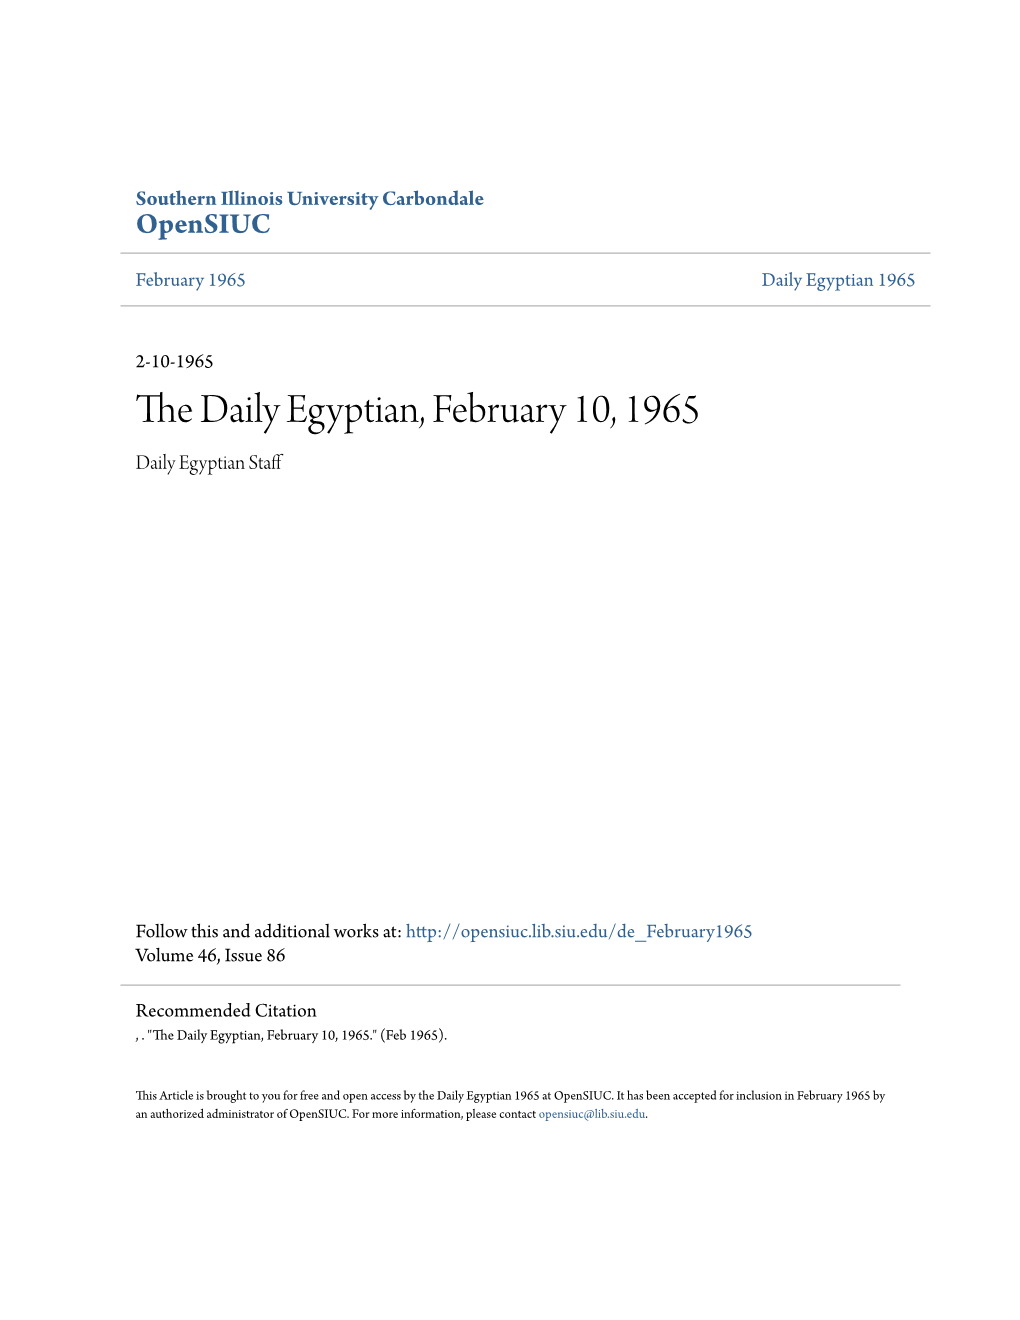 The Daily Egyptian, February 10, 1965